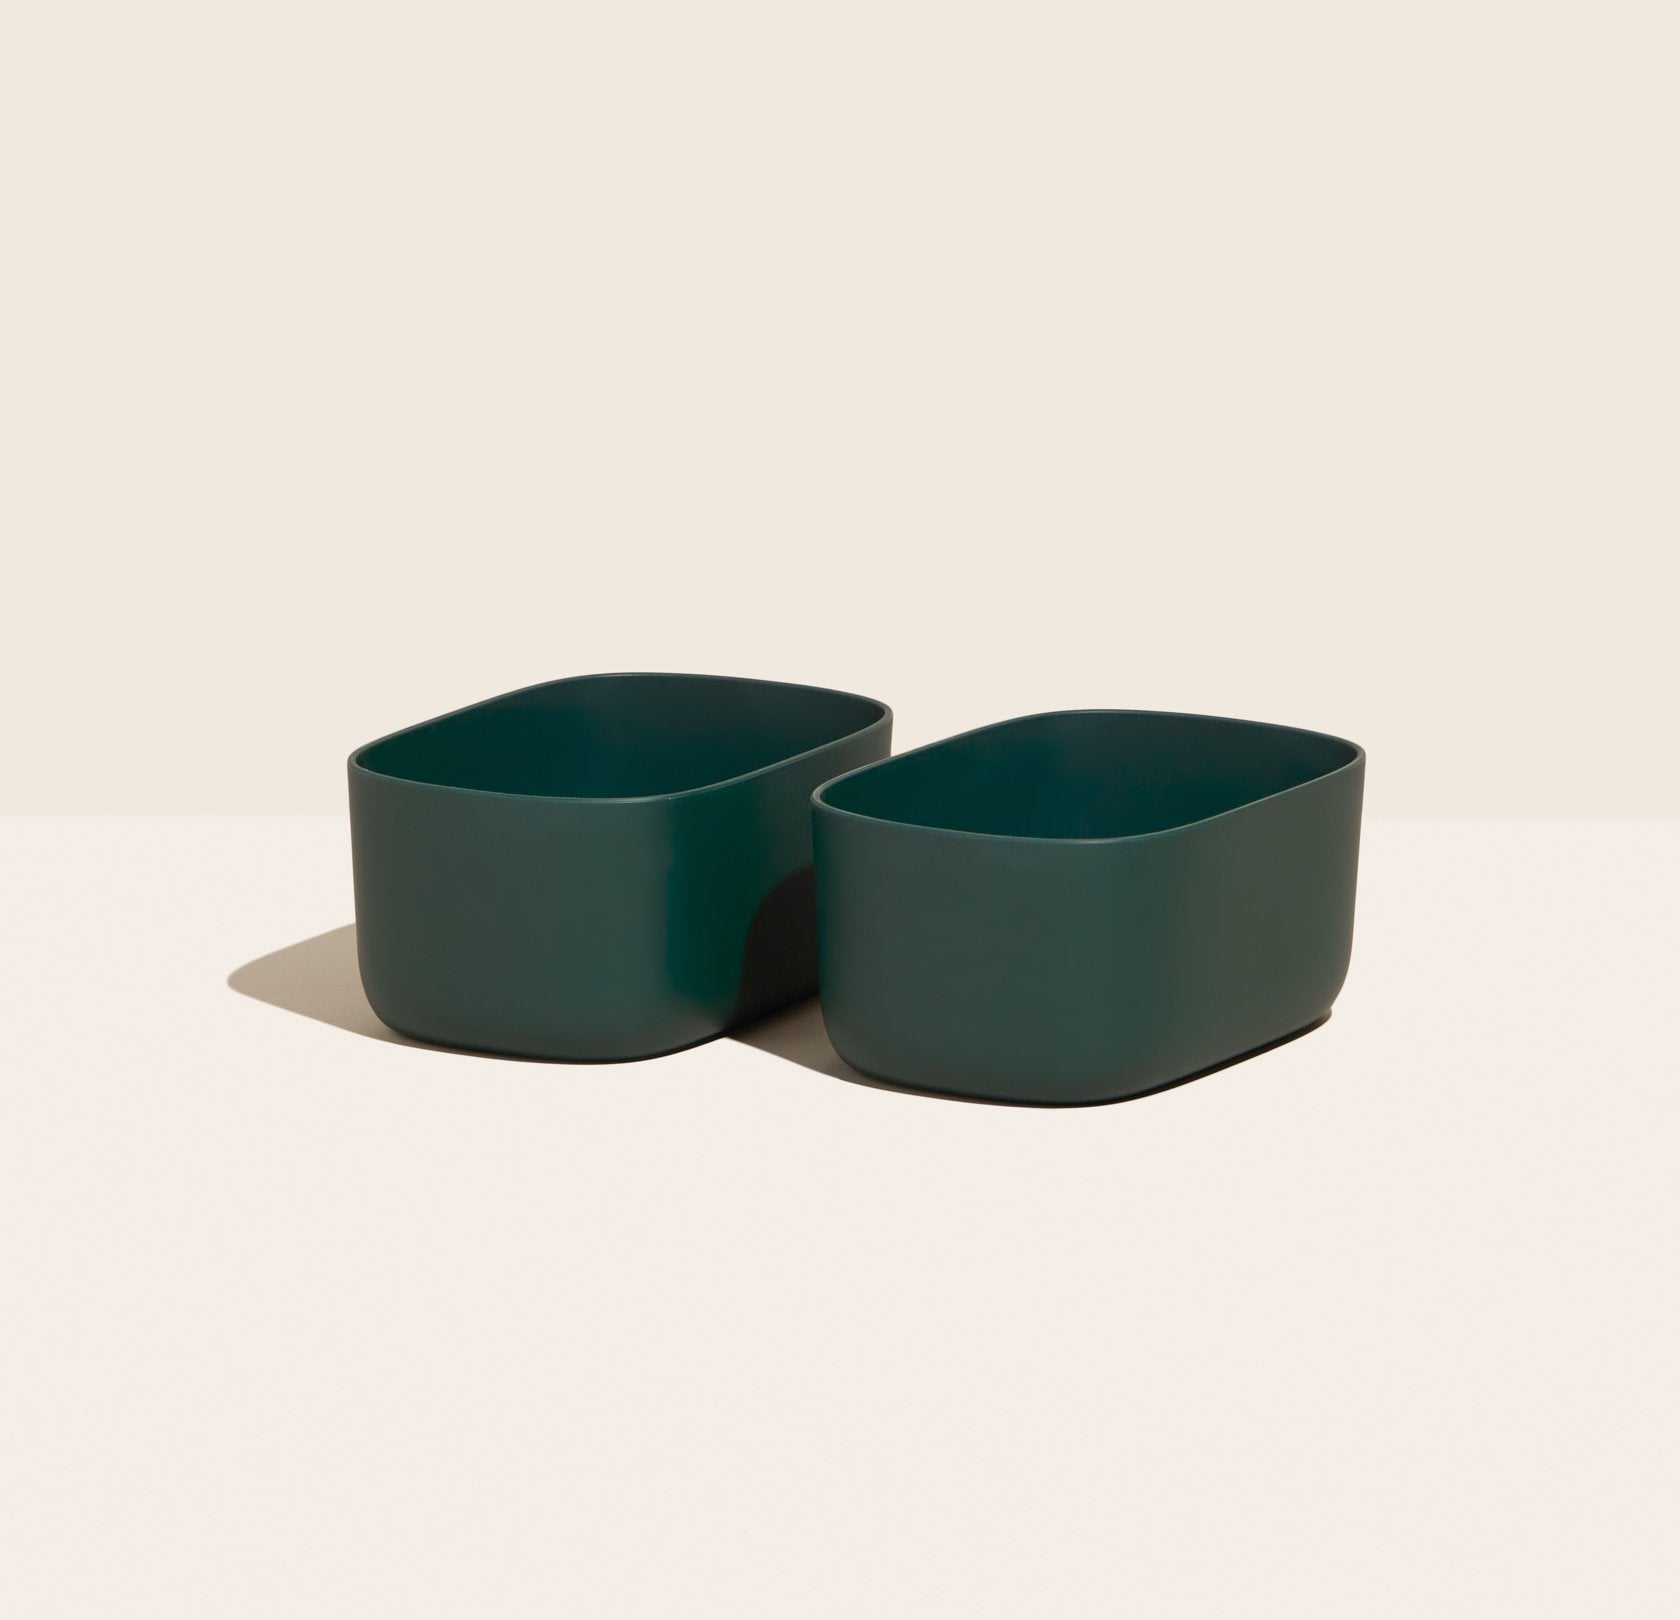 Open Spaces Small Storage Bins - Set of 2 - Green - Mint Lids